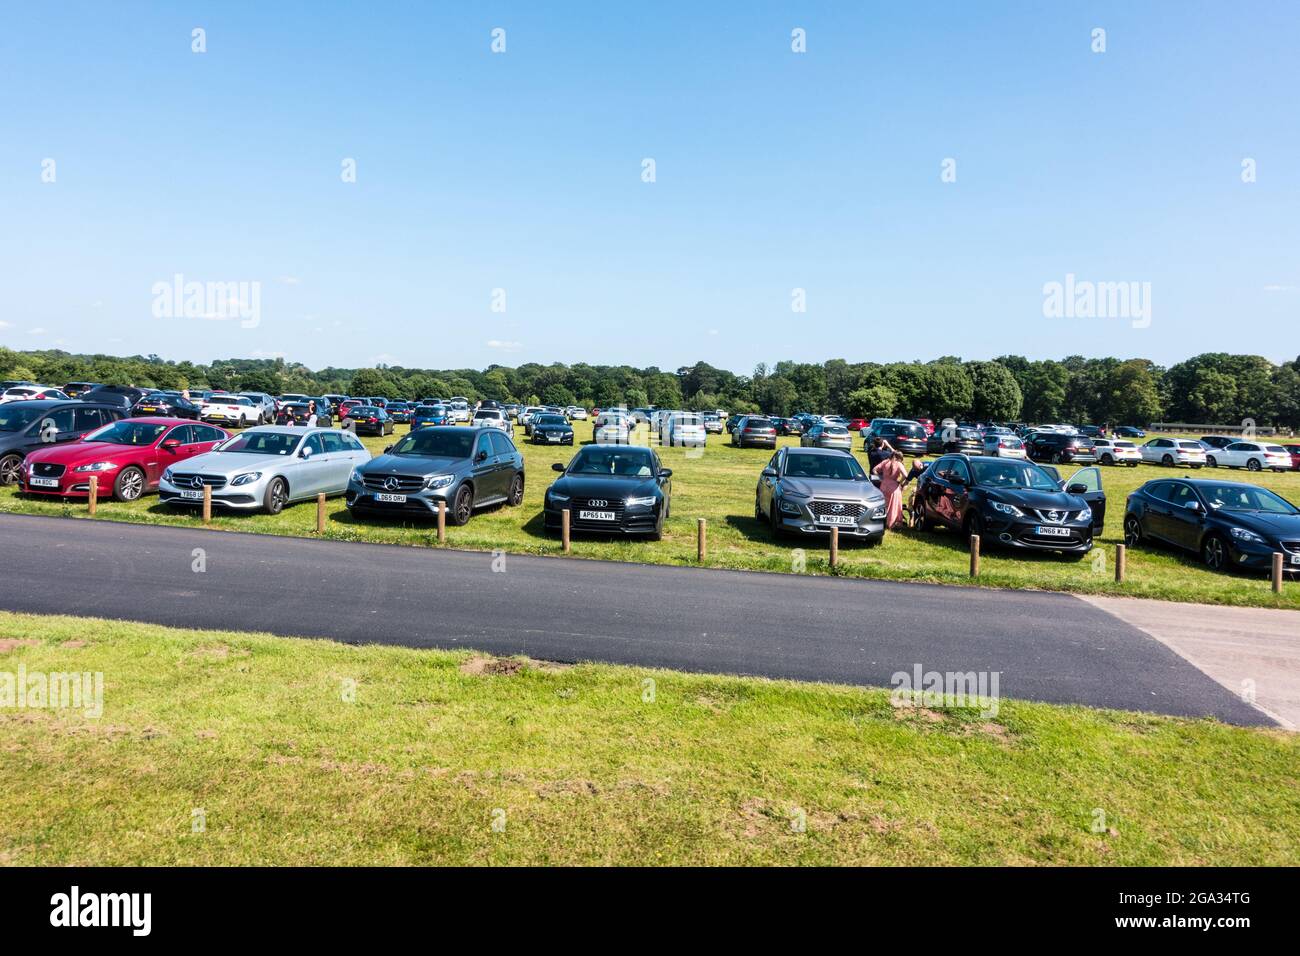 Large group of cars parked on grass verge Stock Photo